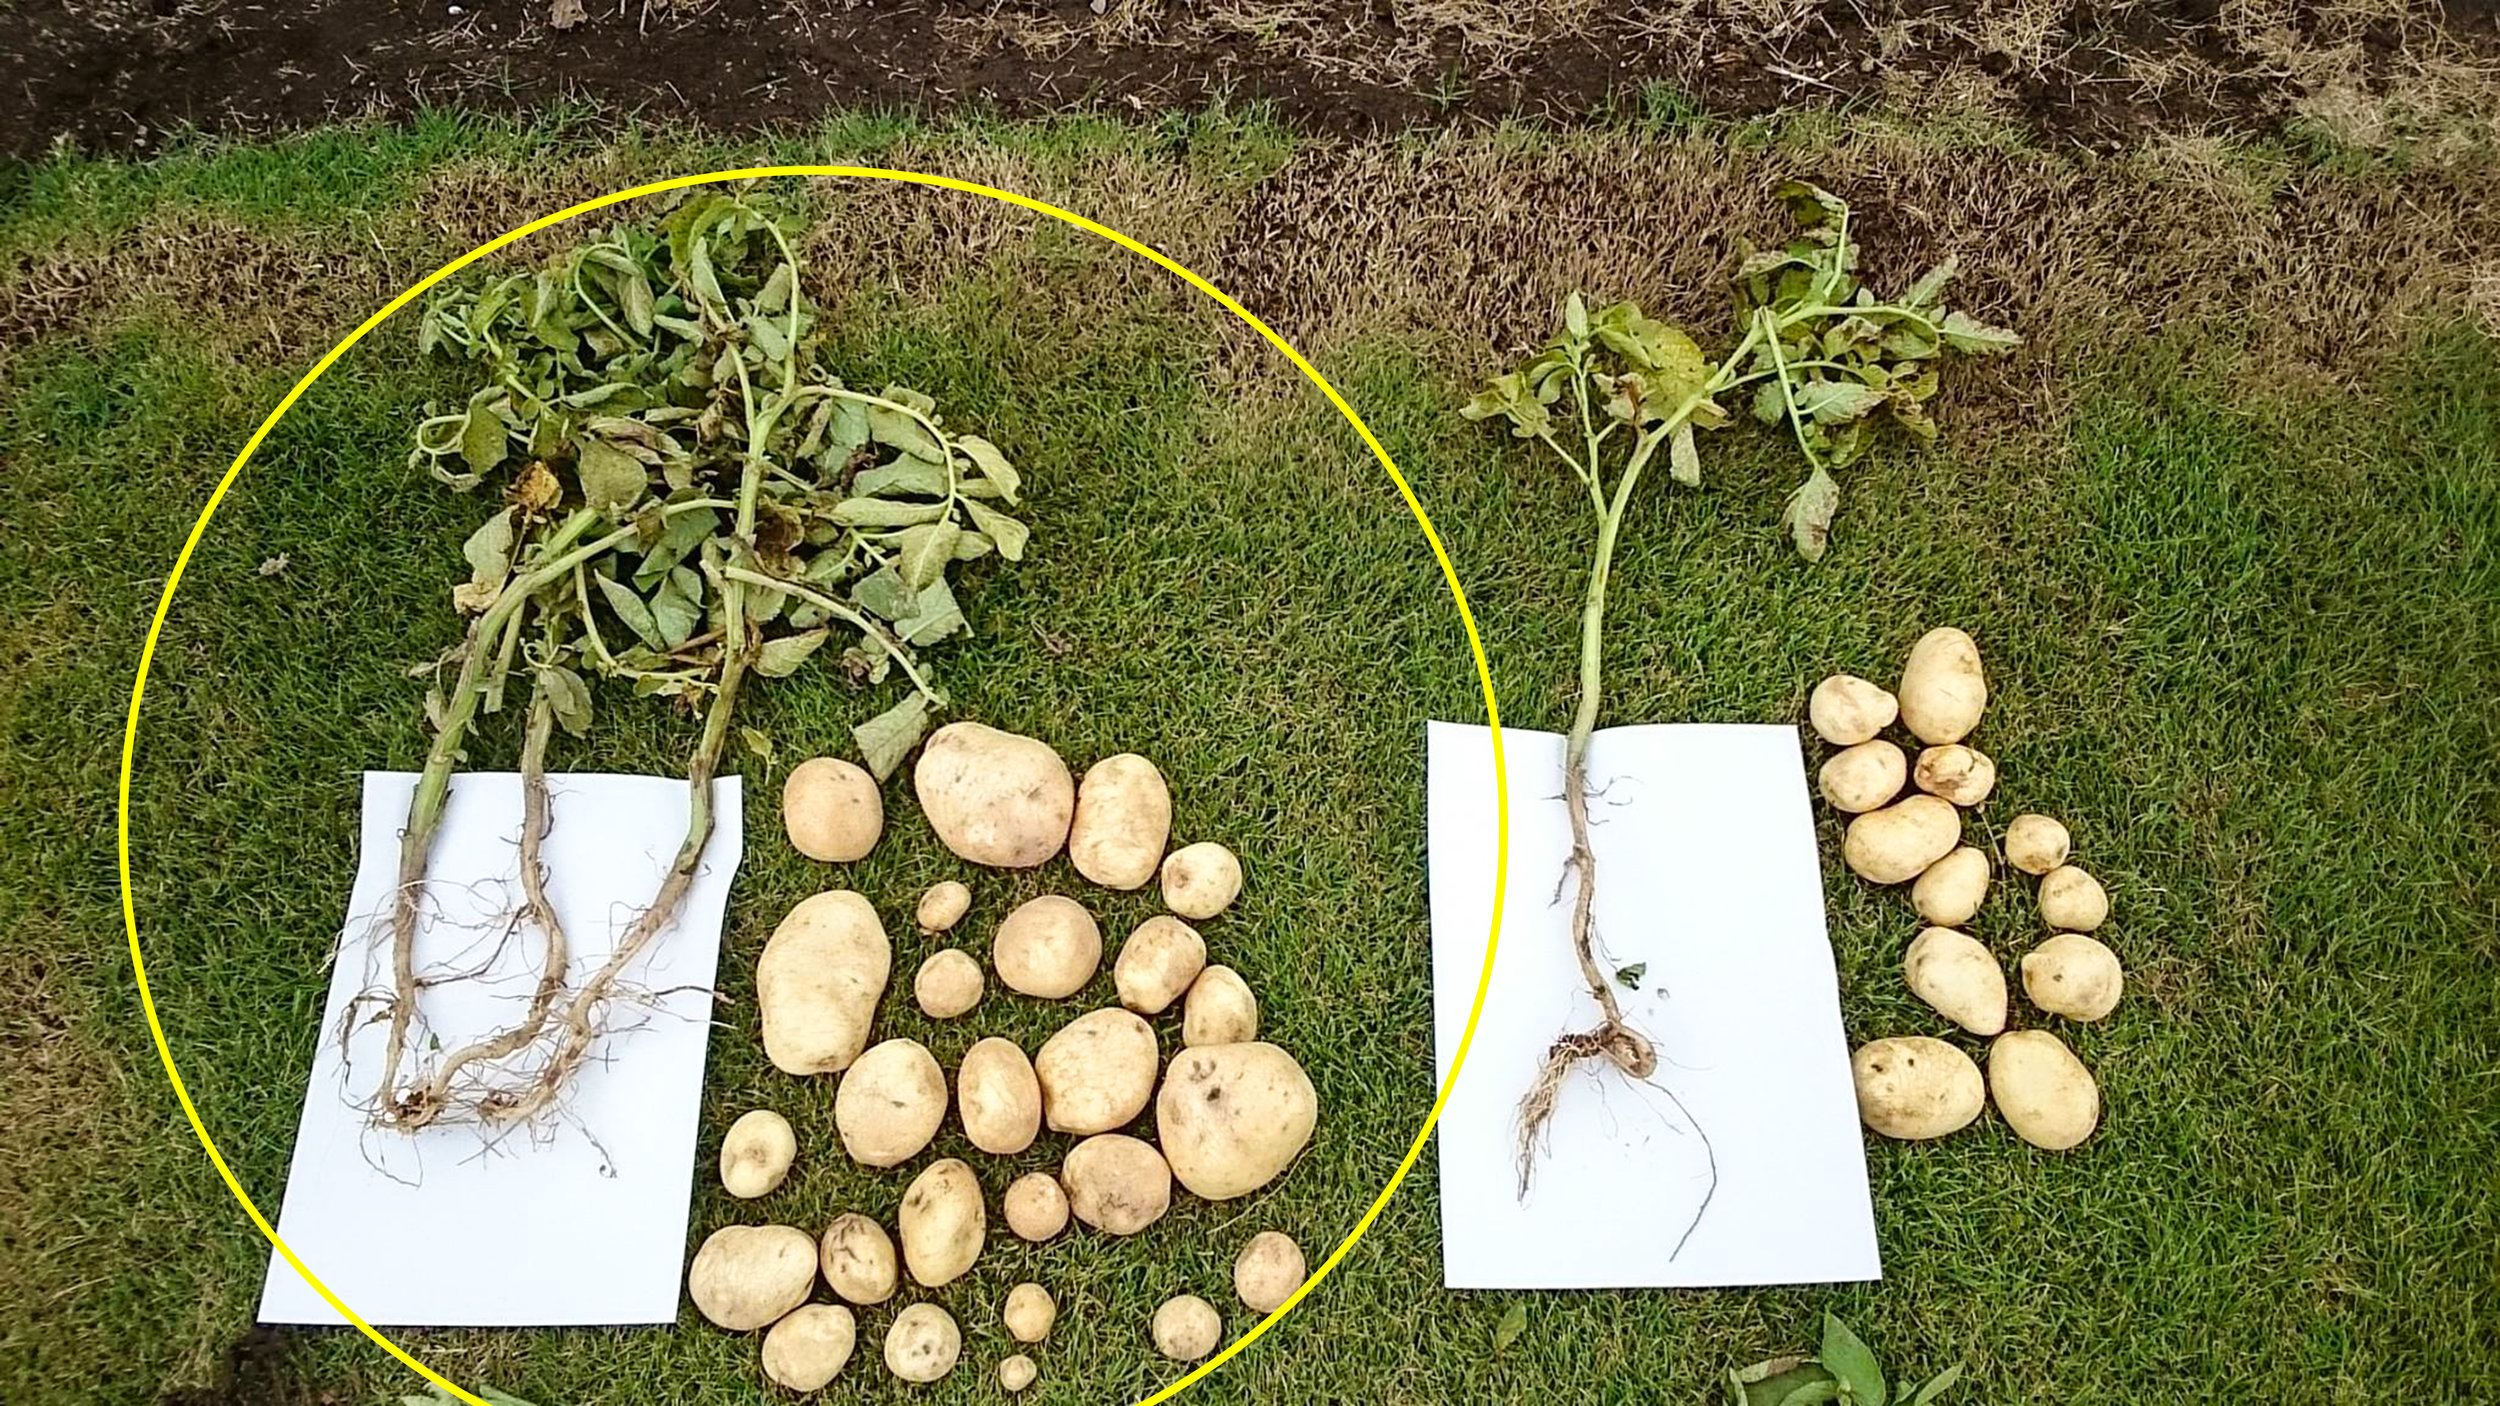 Greatly increased potato yields after 3 months.